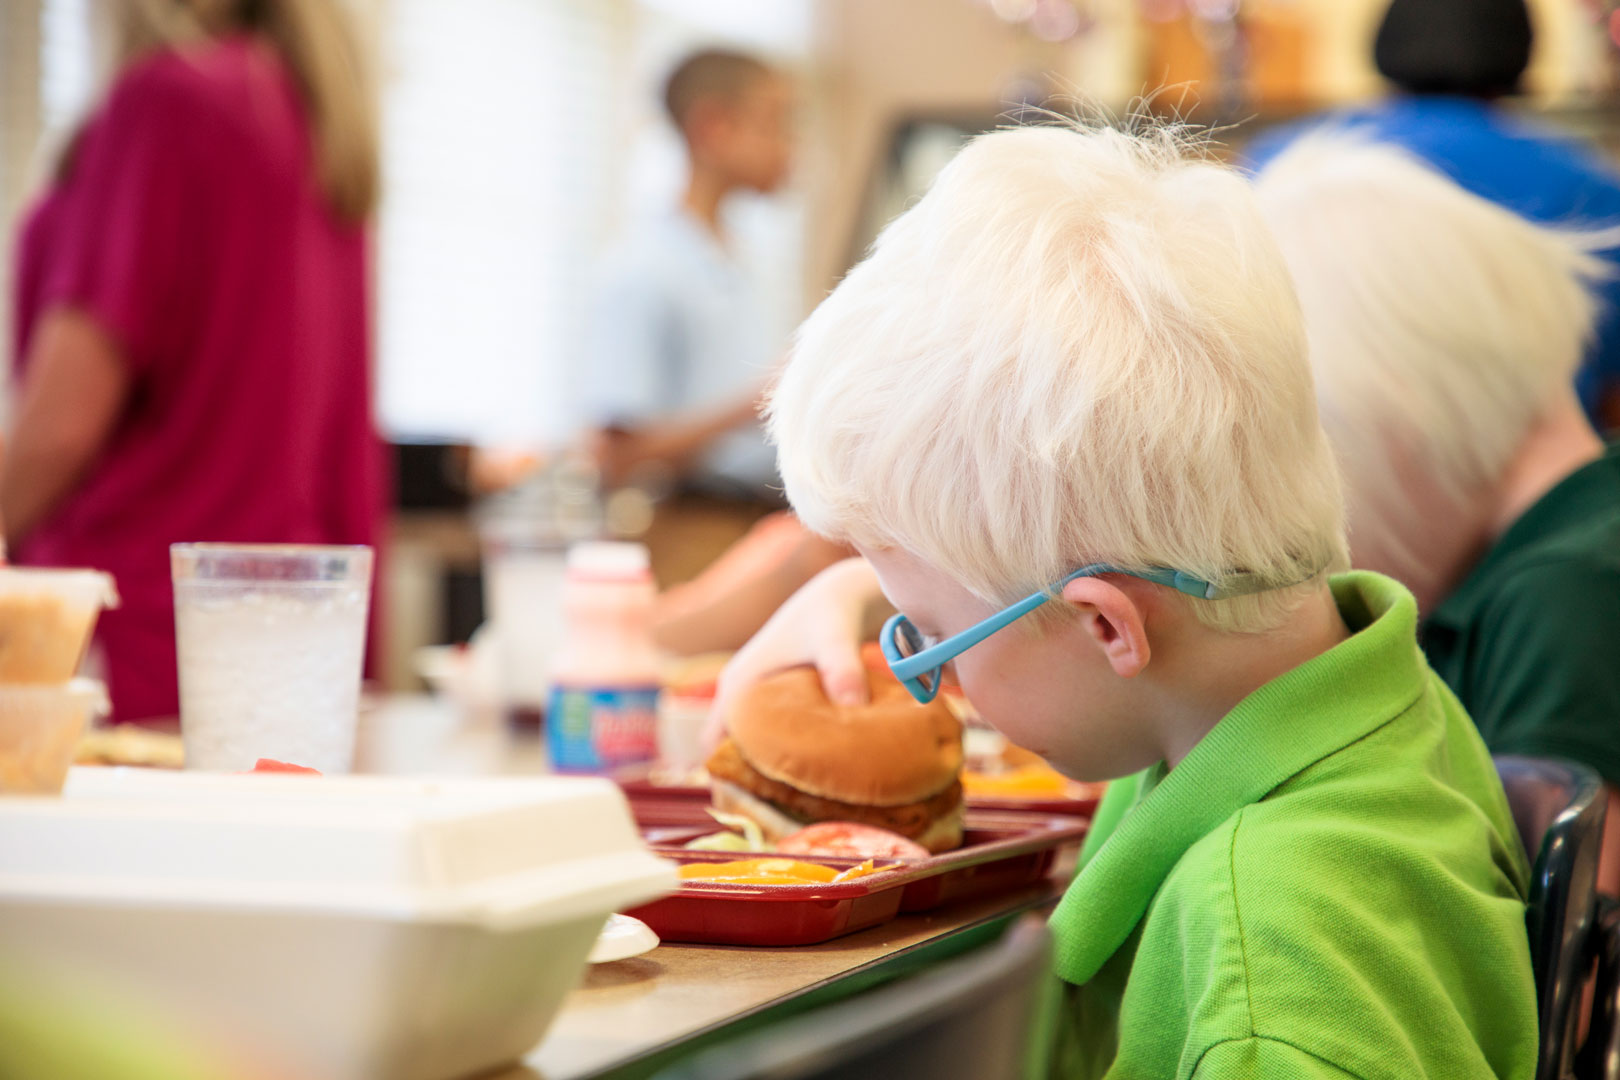 A young boy wearing glasses sitting at a cafeteria table eating.